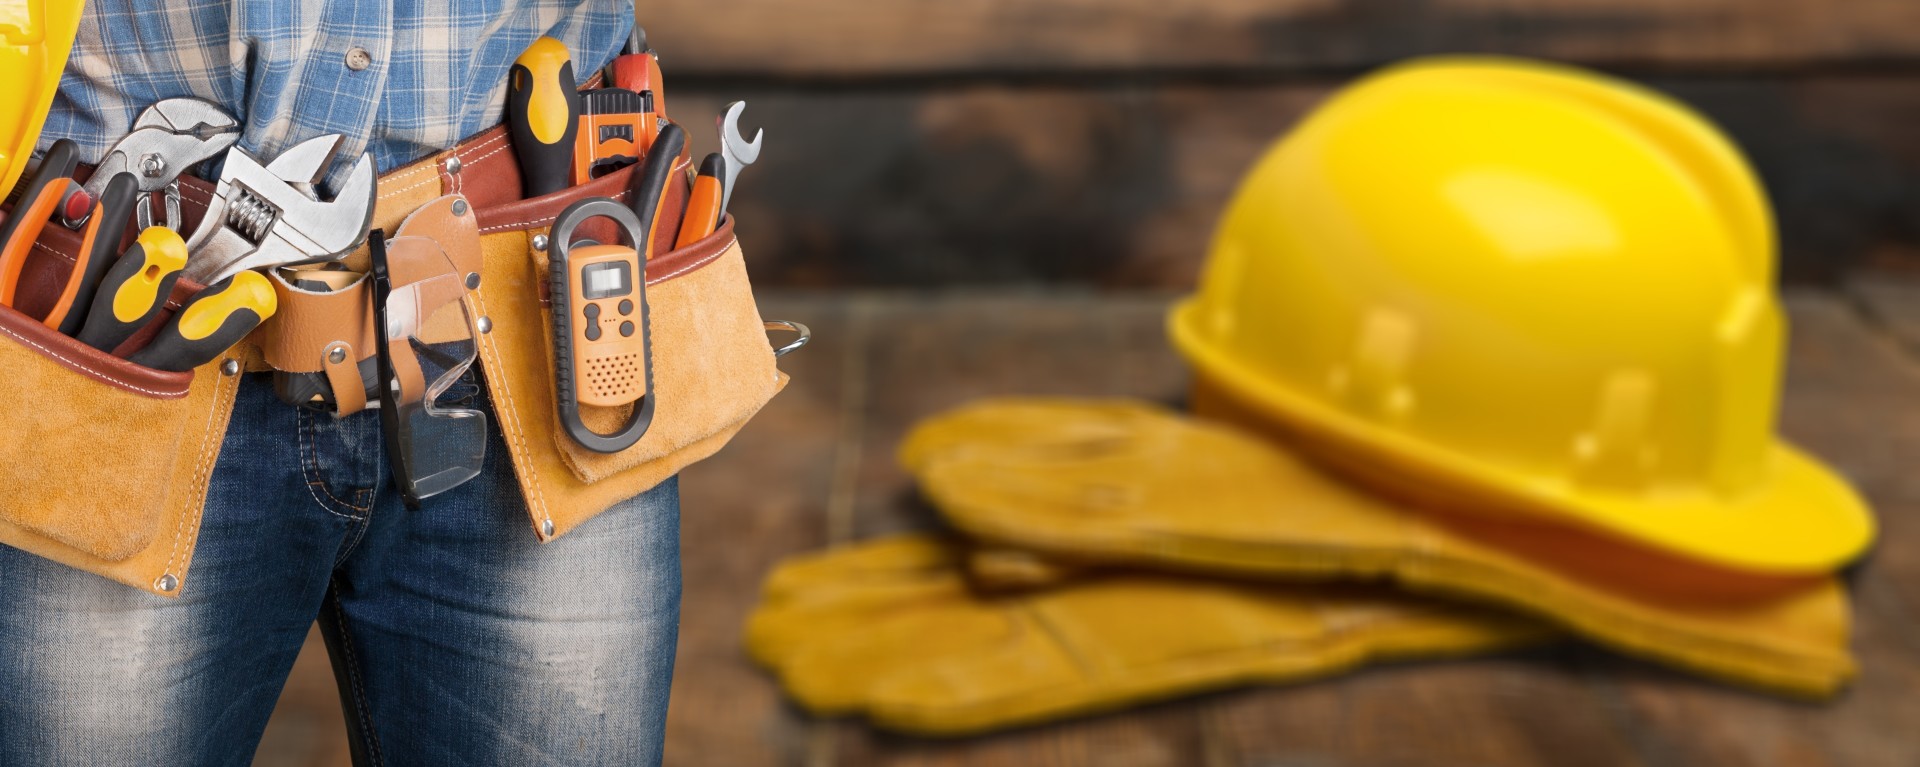 Construction site safety technician jobs in texas